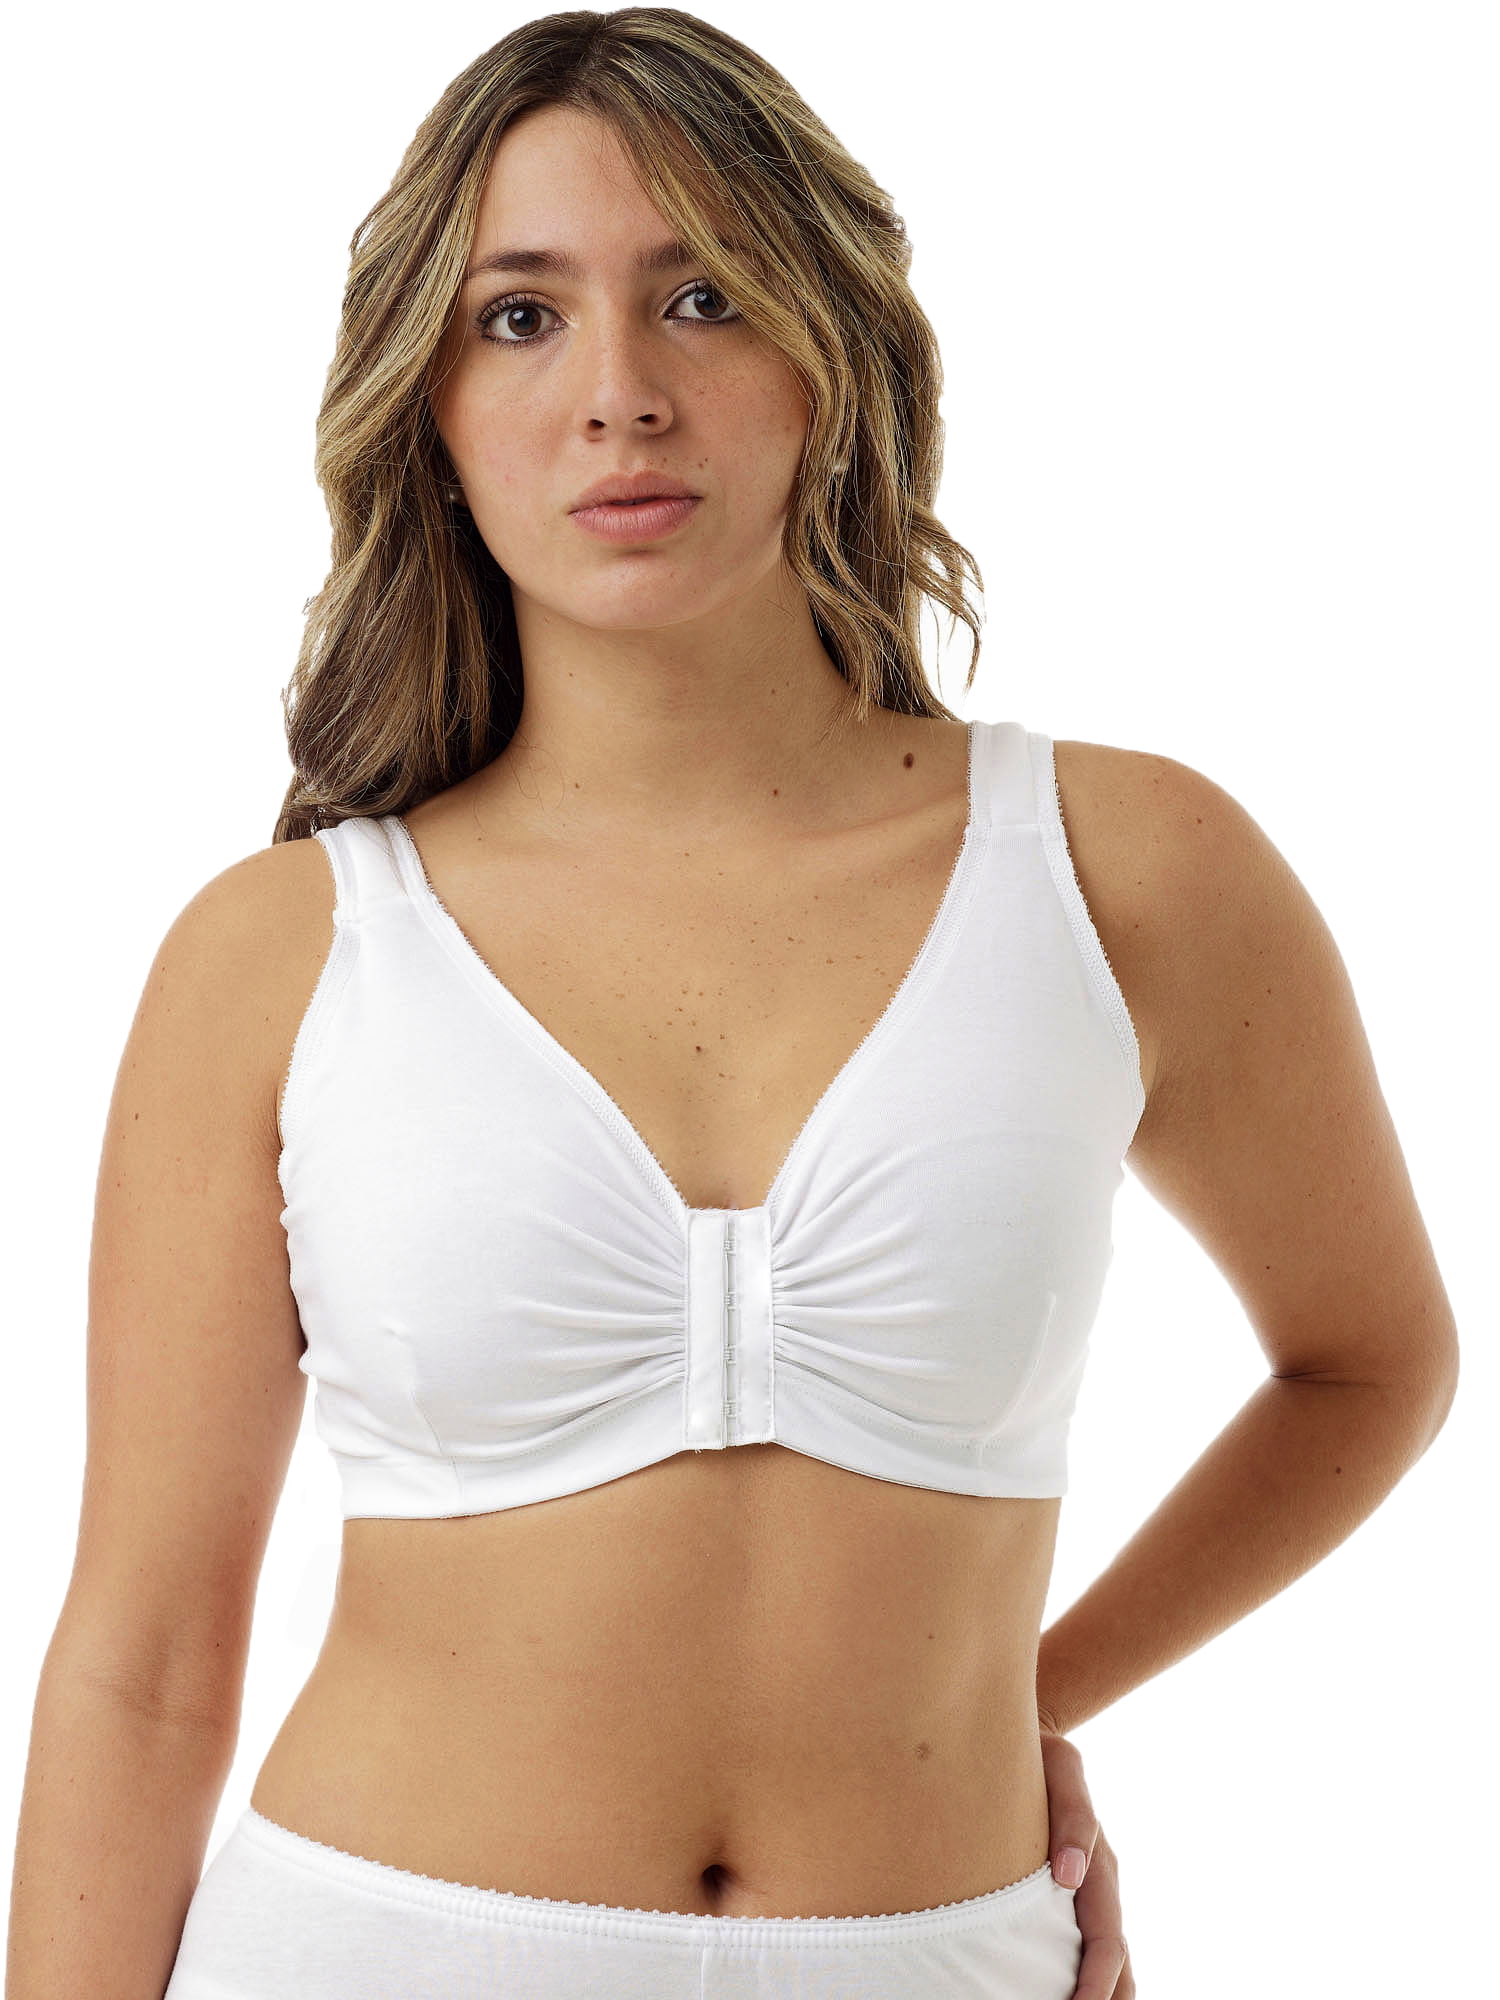 Underworks Mastitis Therapy Bra with Pocket - Hot Compress Pads Included -  Adjustable - Postpartum Breast Engorgement Relief - 44-46-bcd - White